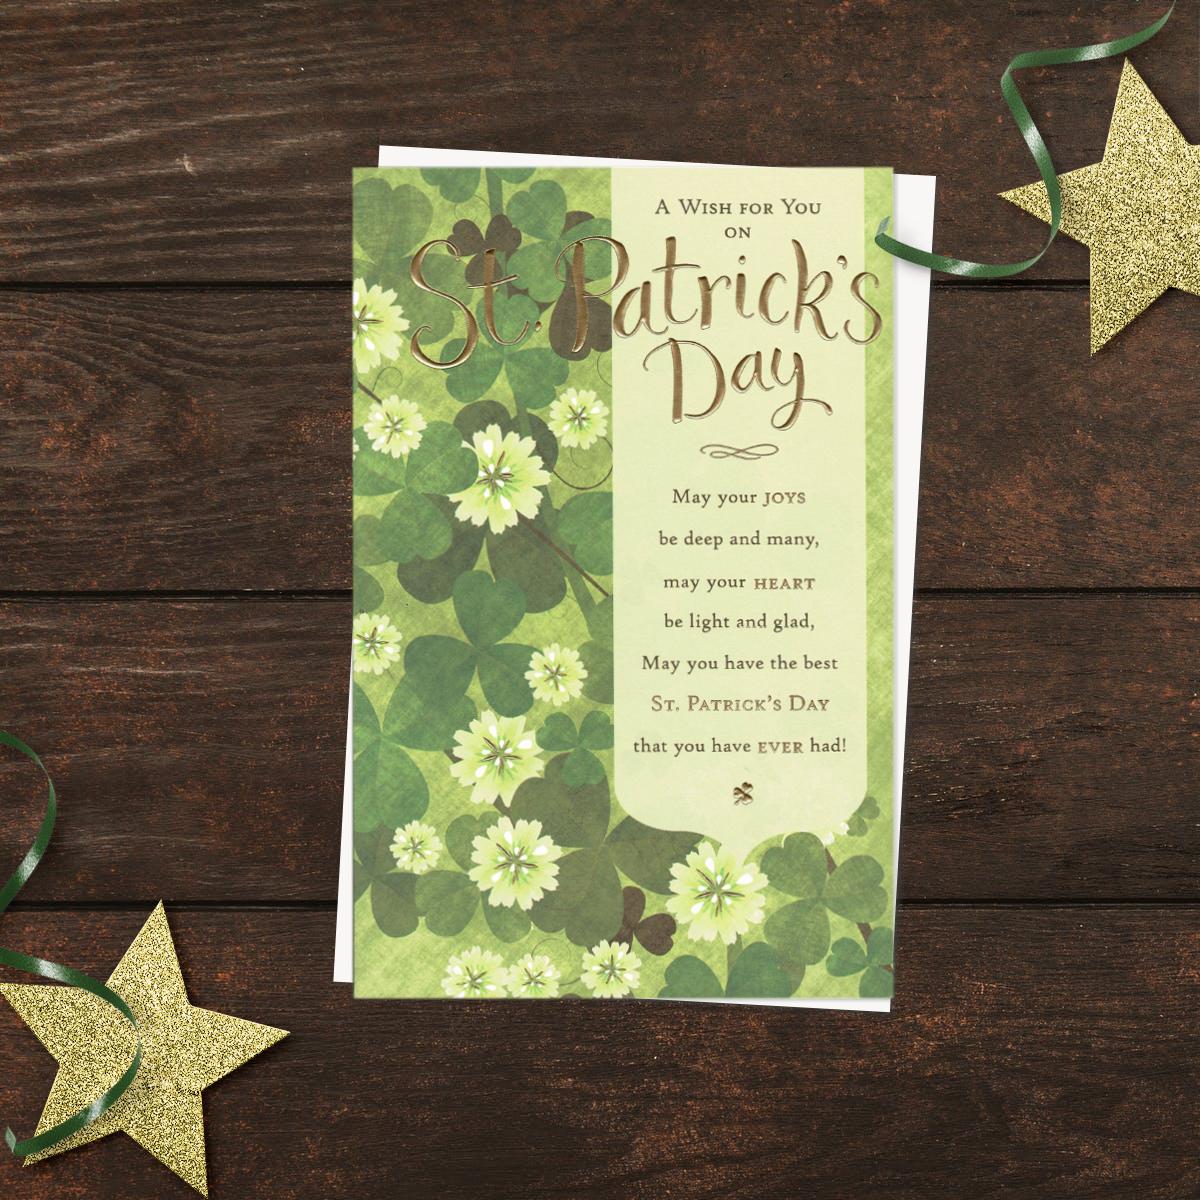 ' A Wish For You On St. Patrick's Day' Card with flowering clover and heartfelt verse